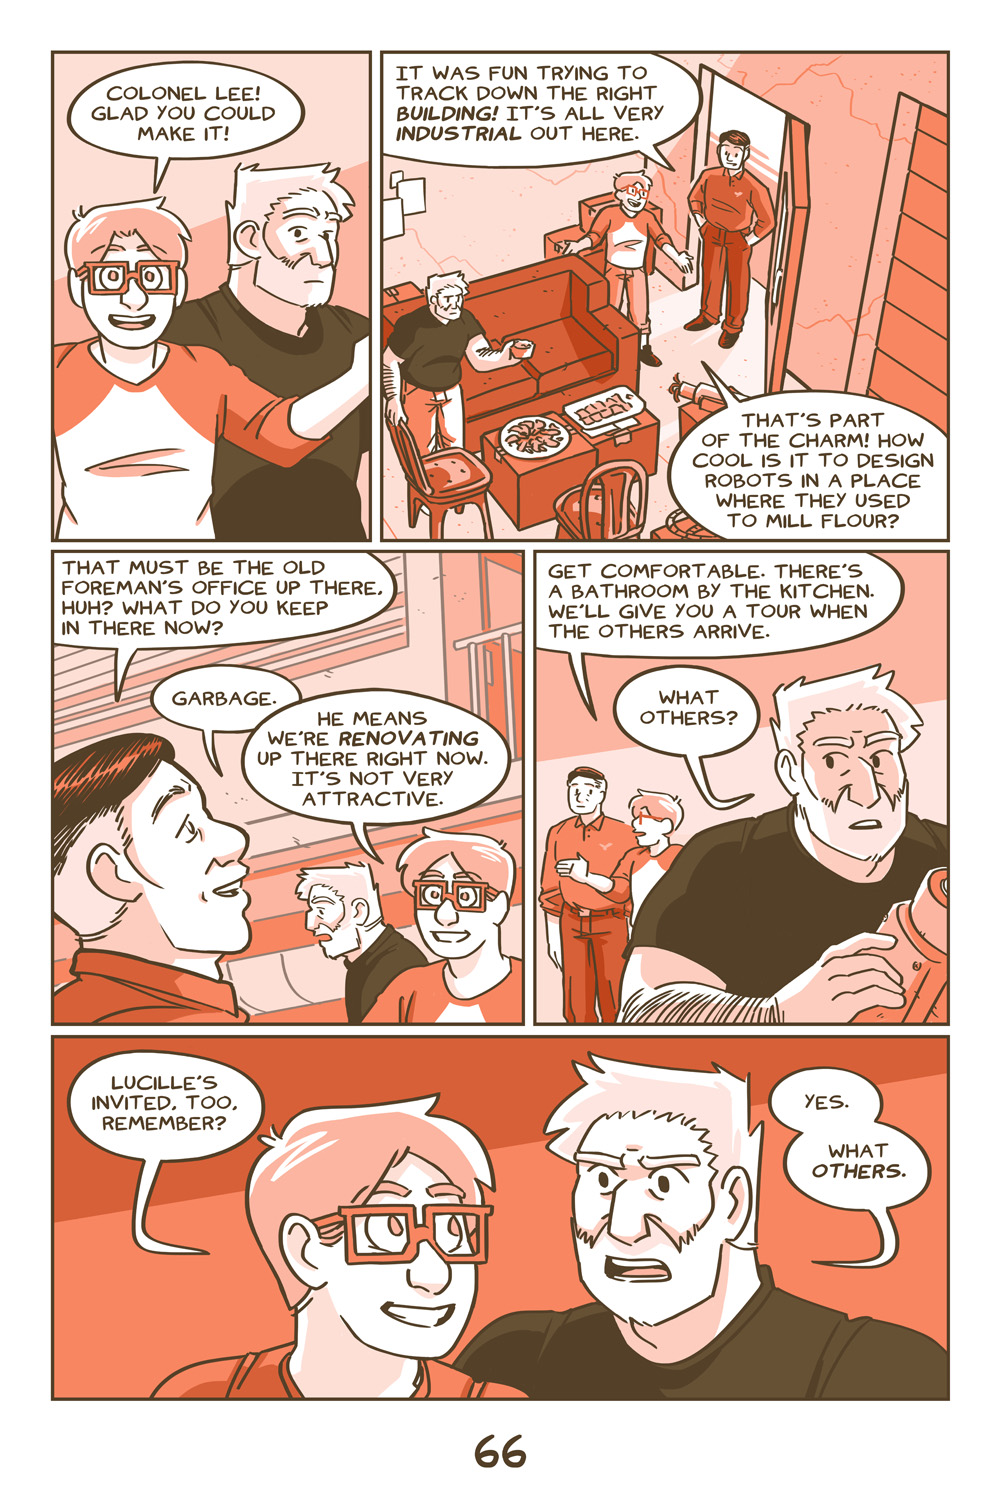 Chapter 4, Page 66